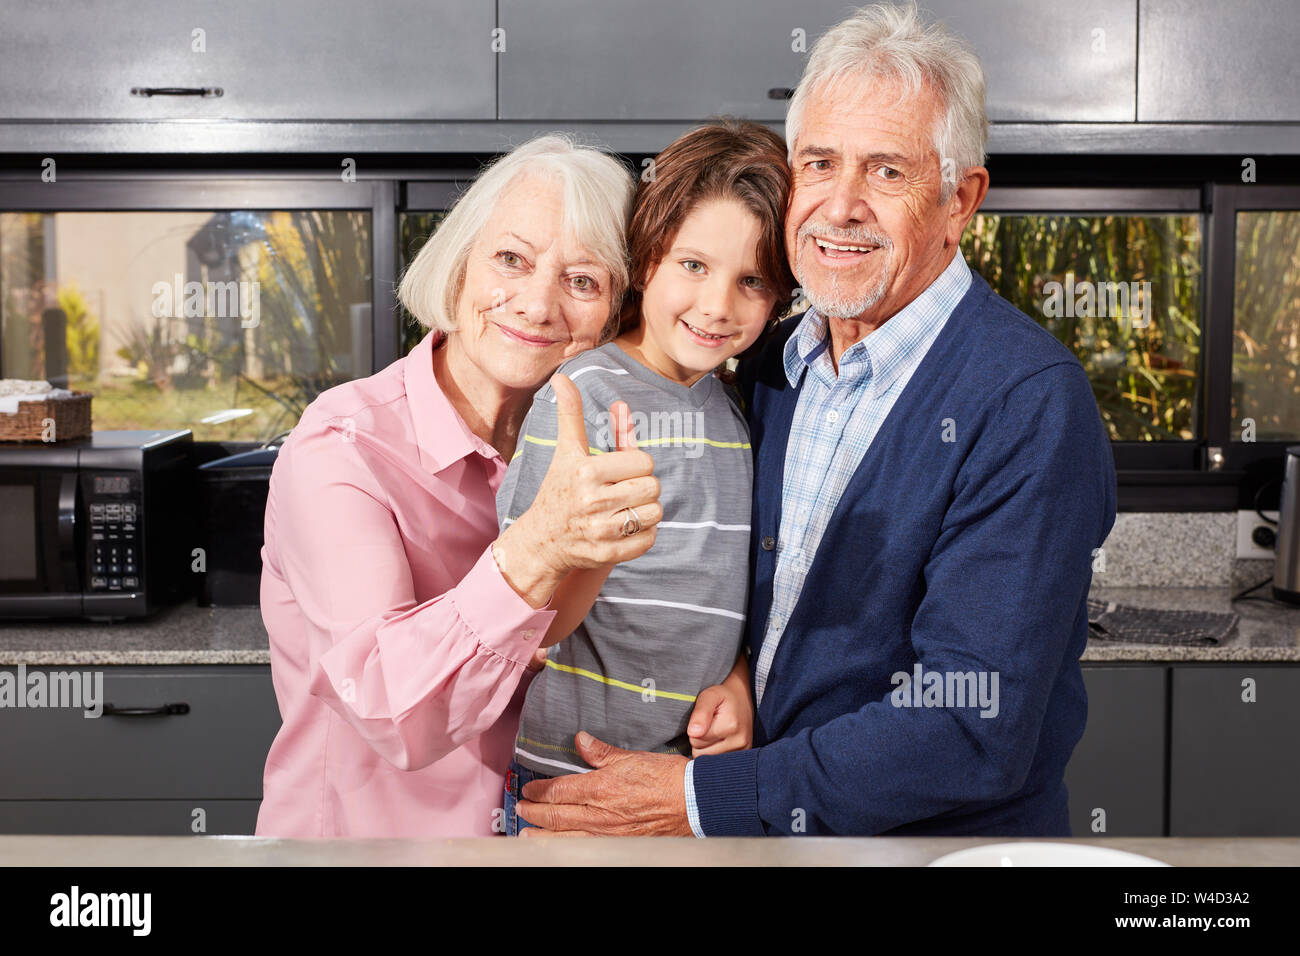 Grandparents as grandma and grandpa together with their grandson show the thumbs up Stock Photo